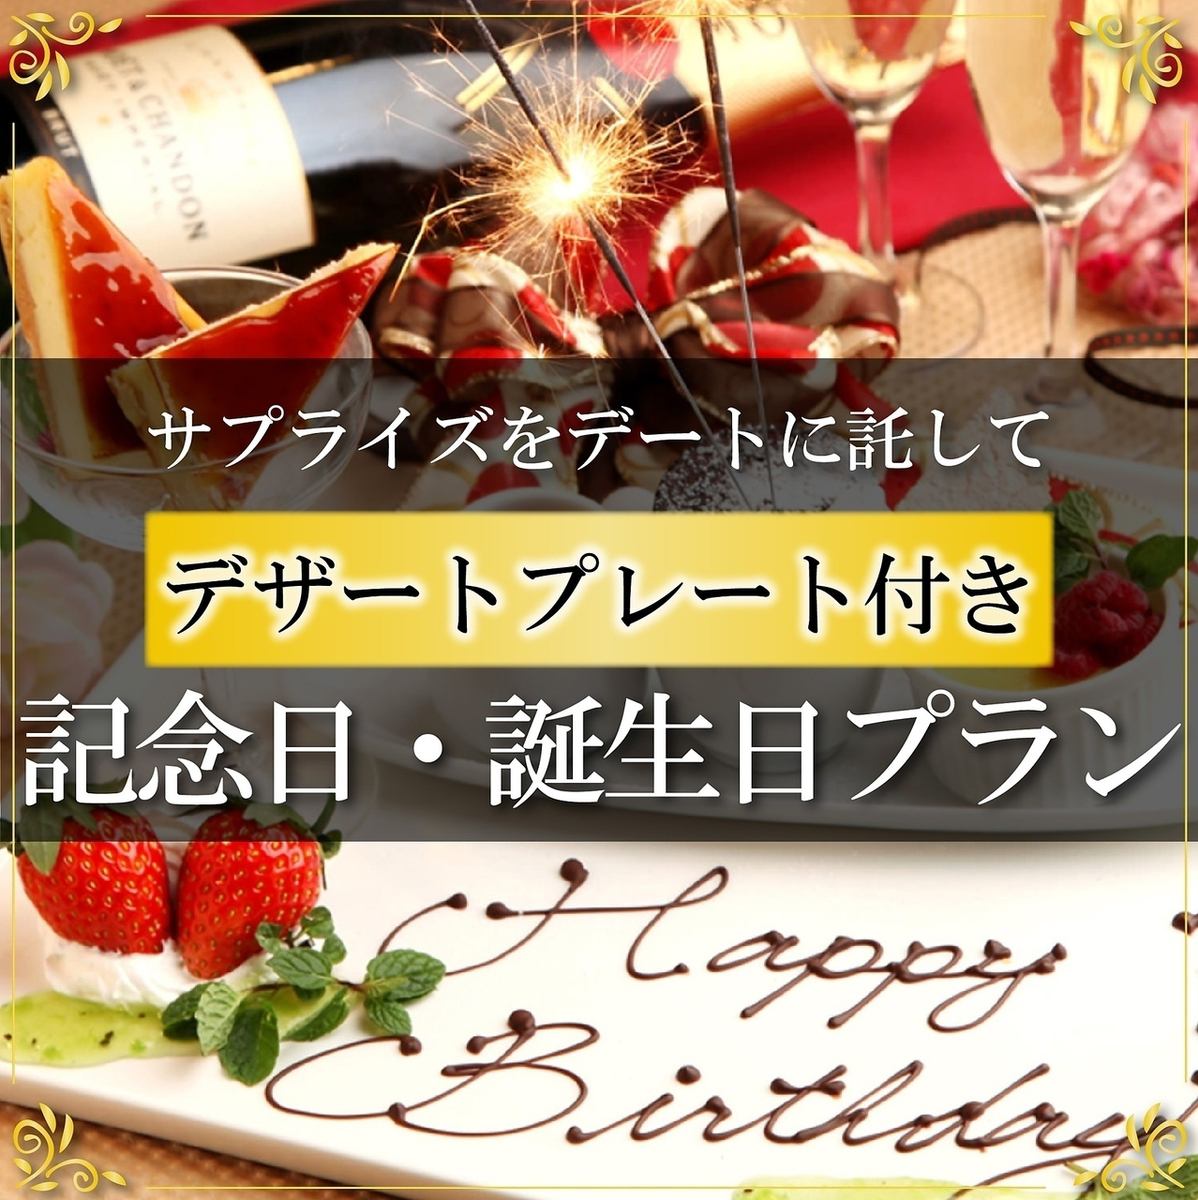 Special cake or sparkling wine will be presented for birthdays and anniversaries.